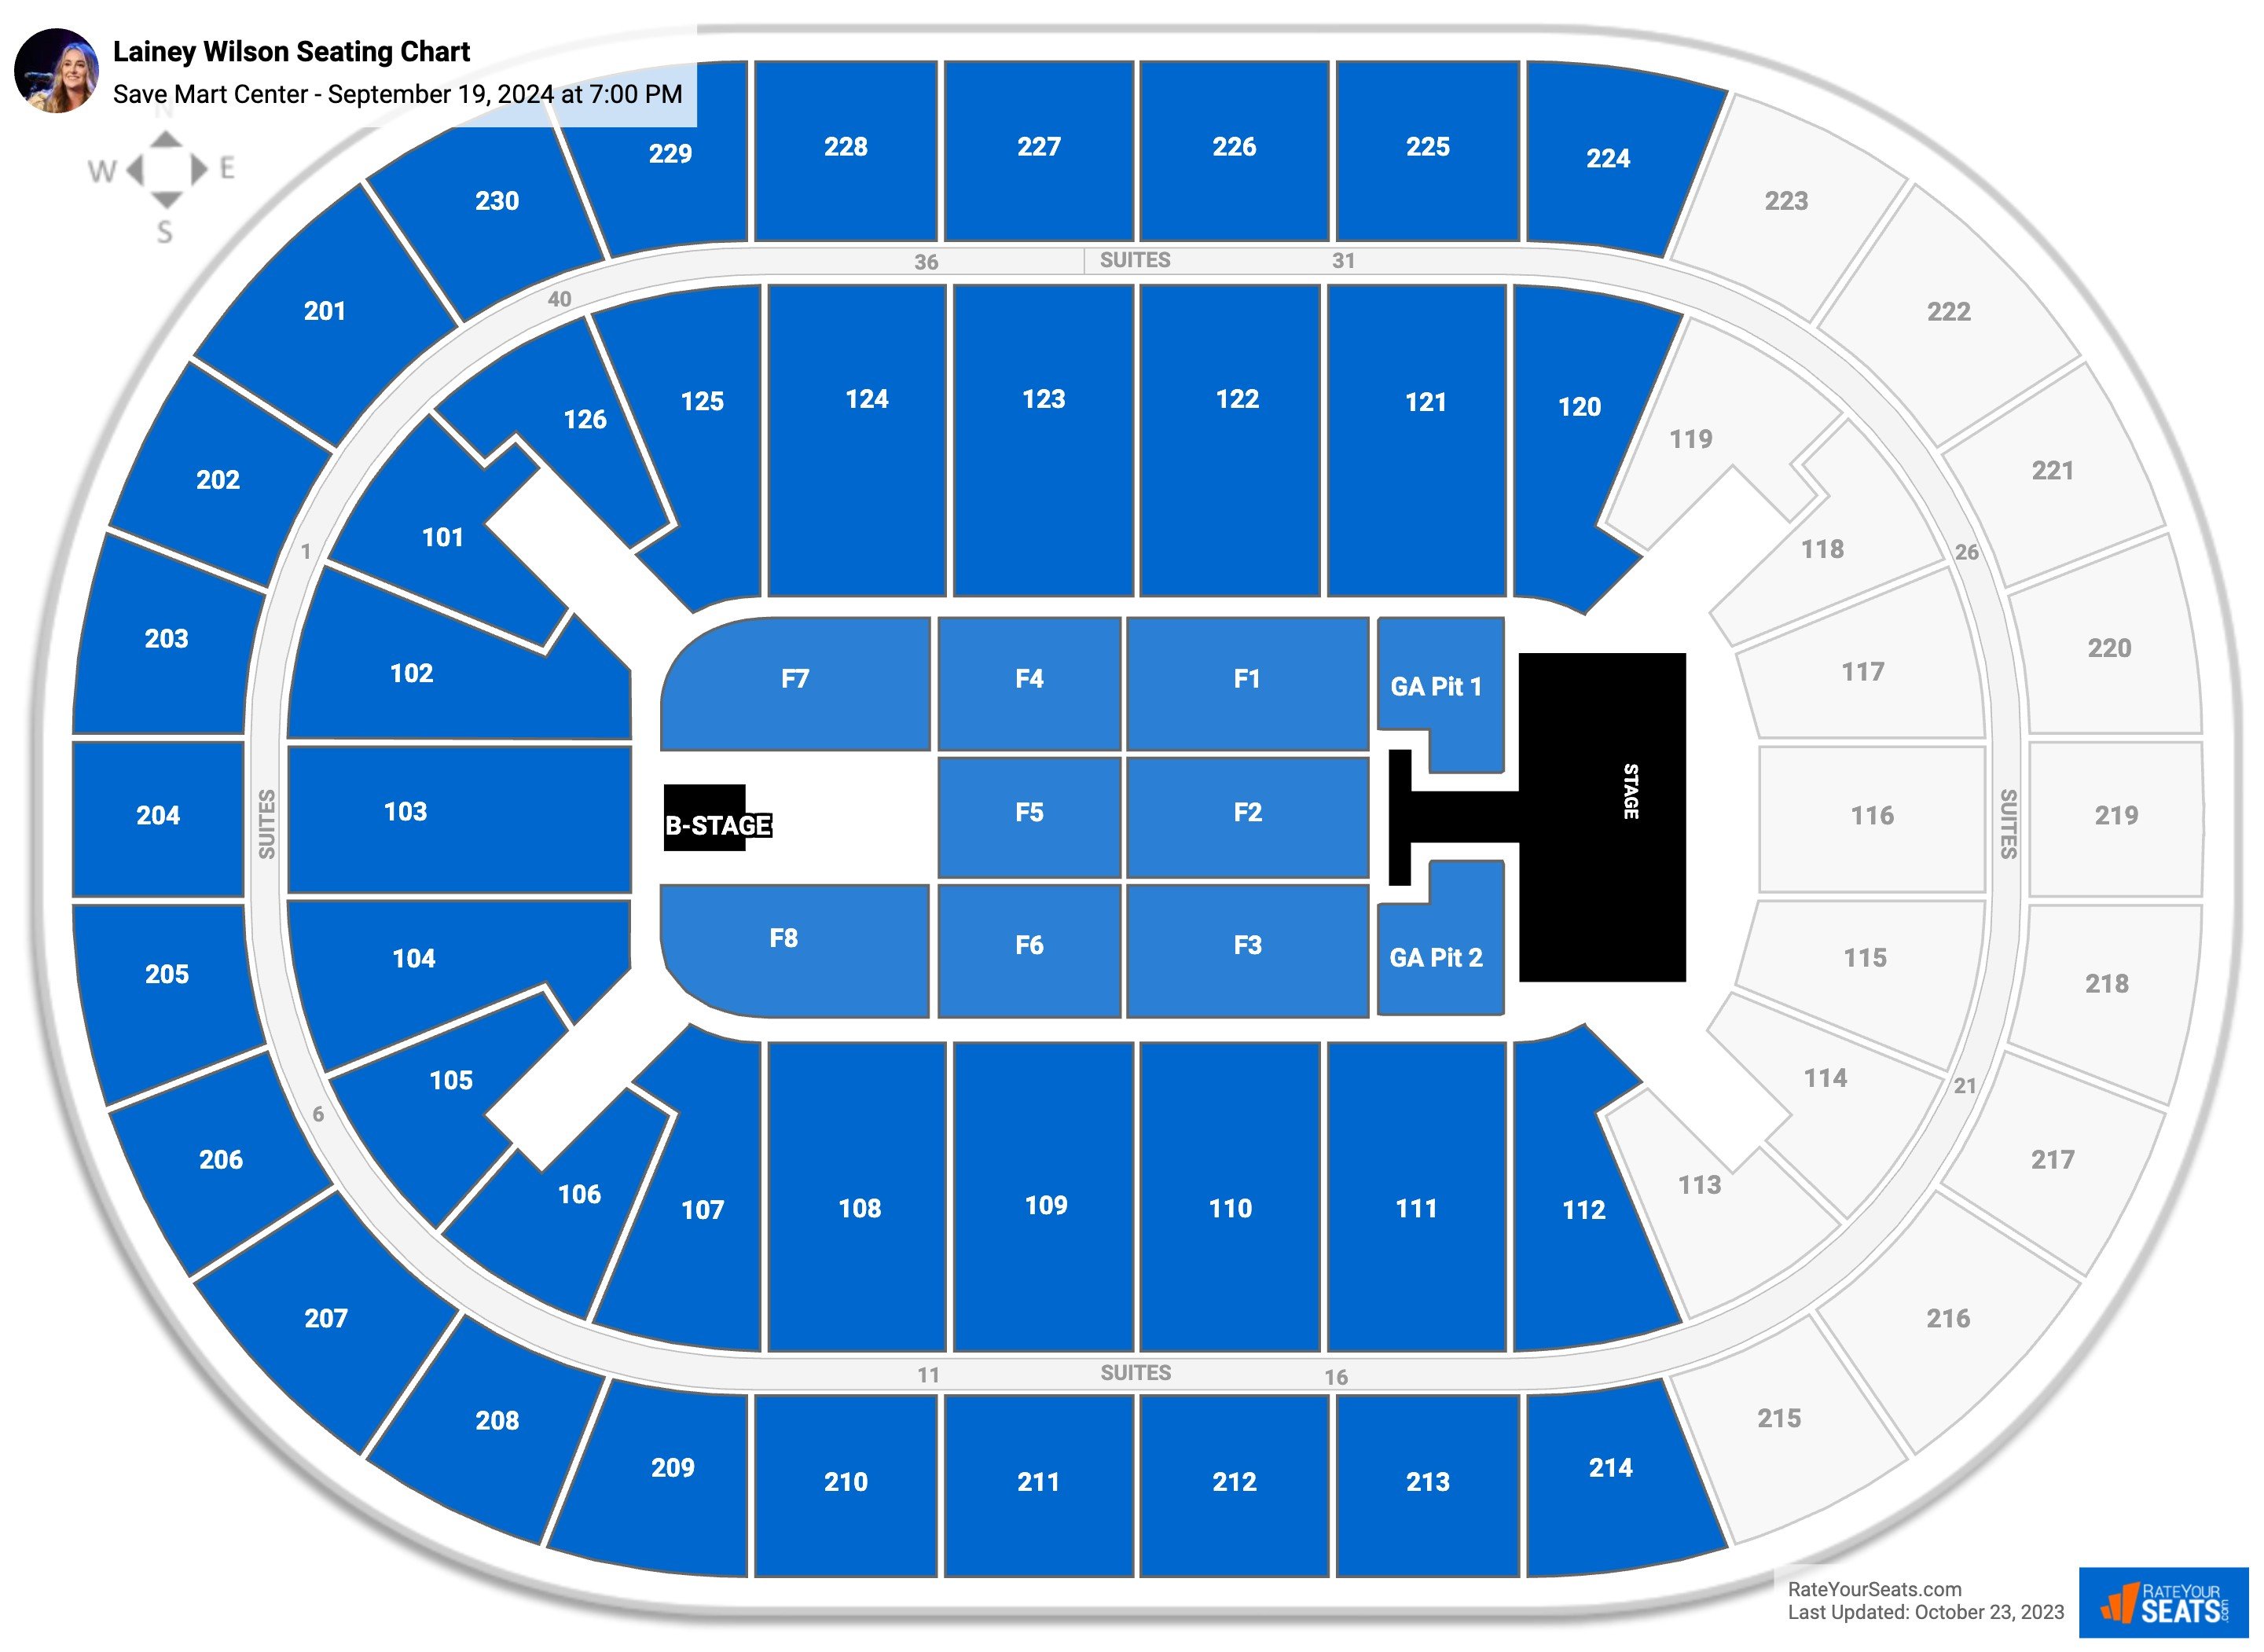 Lainey Wilson seating chart Save Mart Center